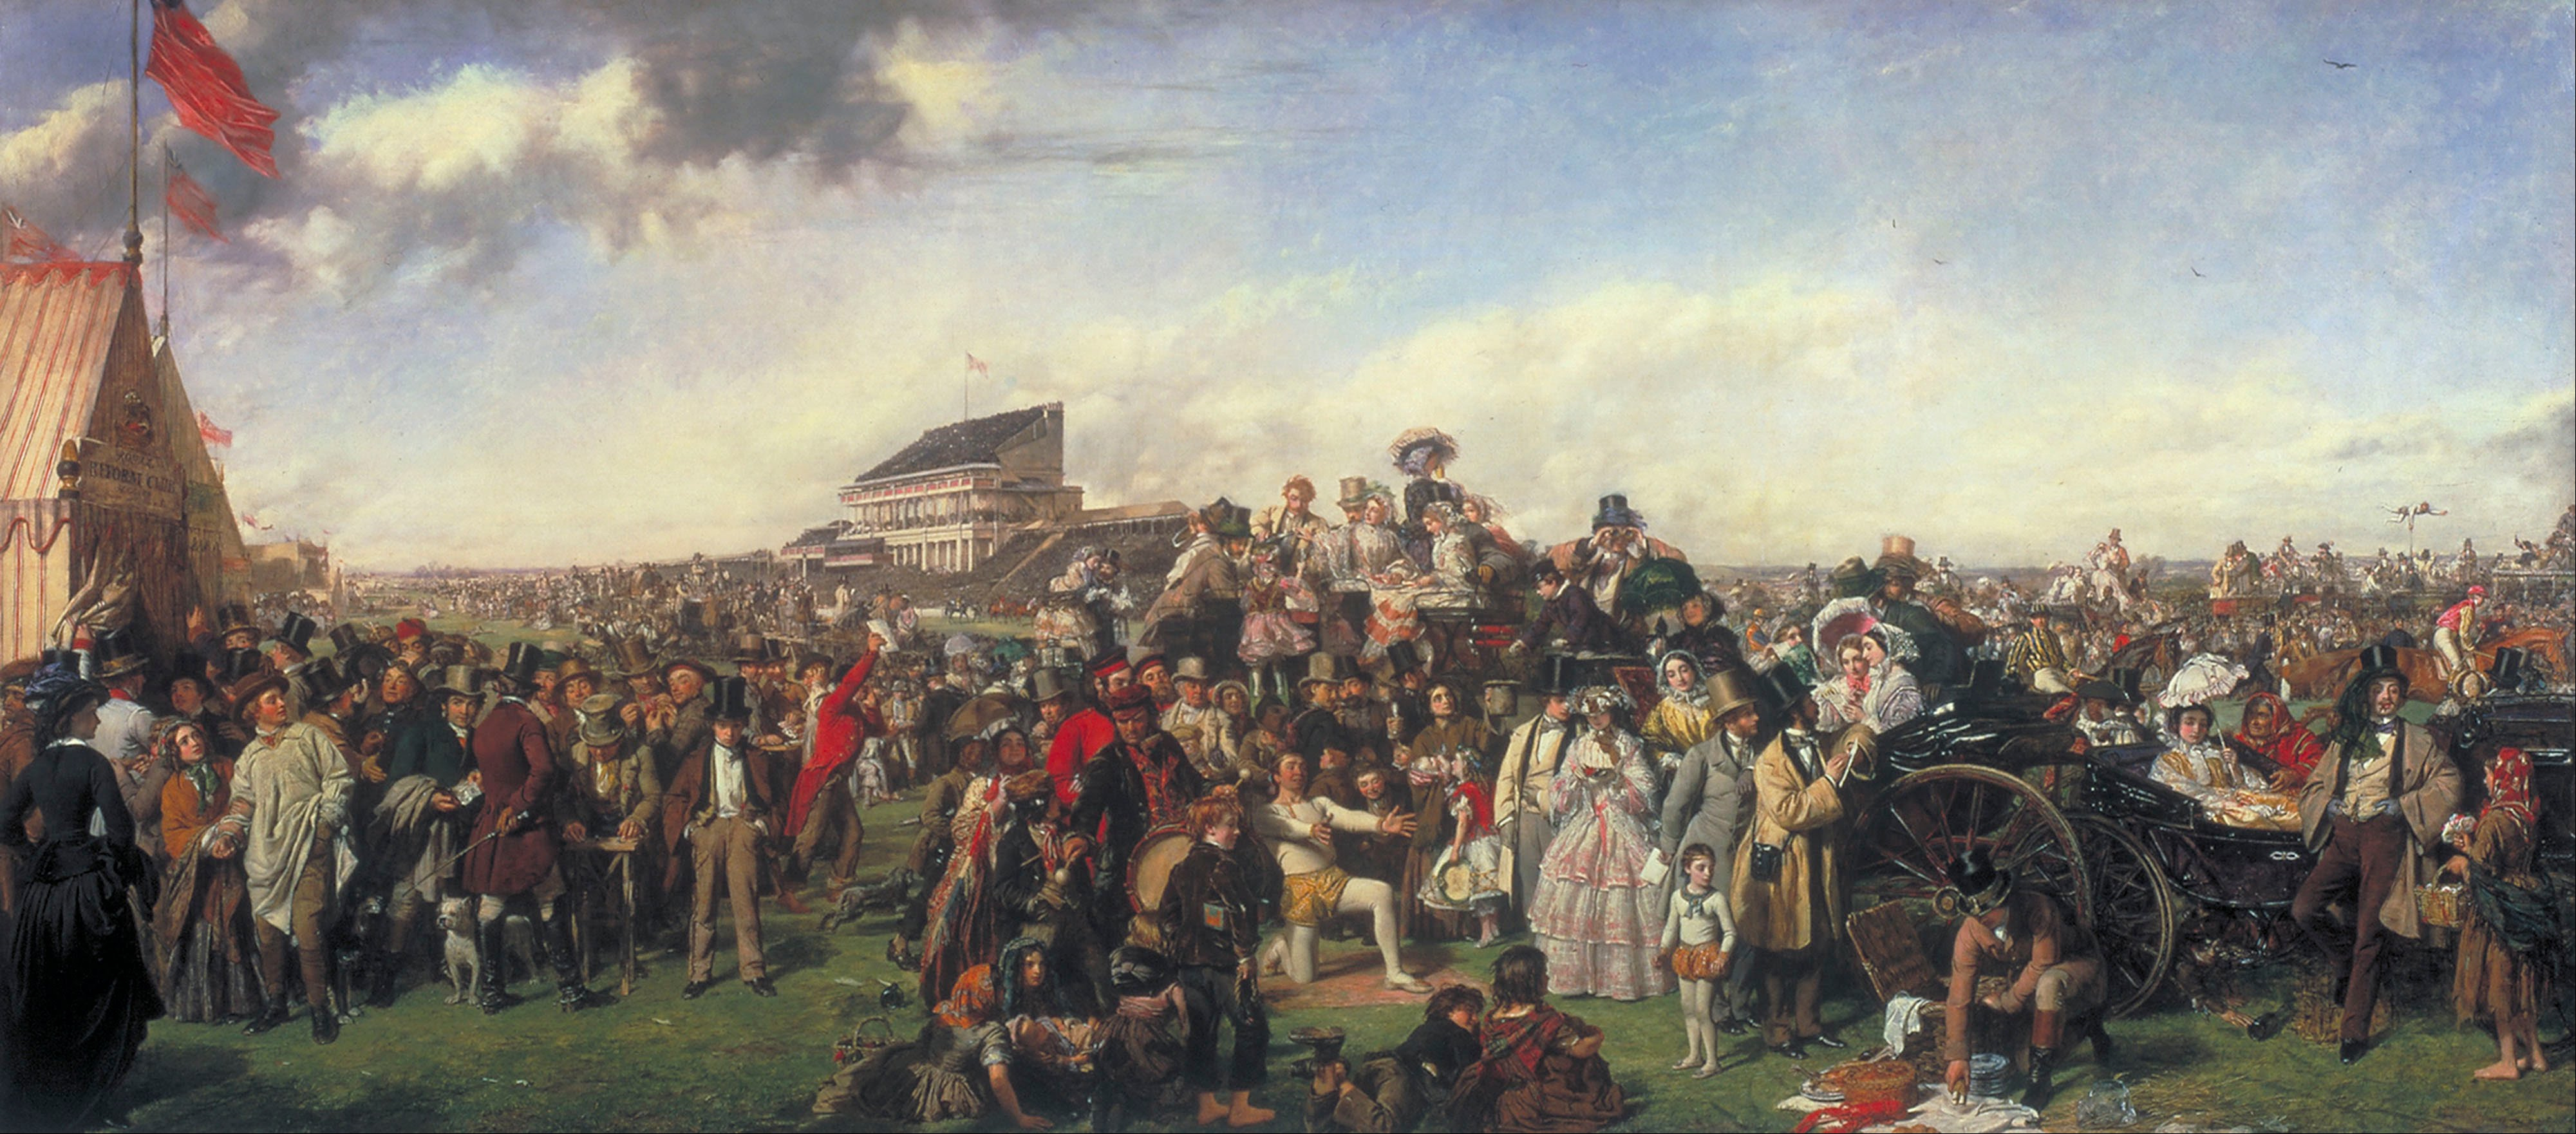 William Powell Frith’s The Derby Day(1856)